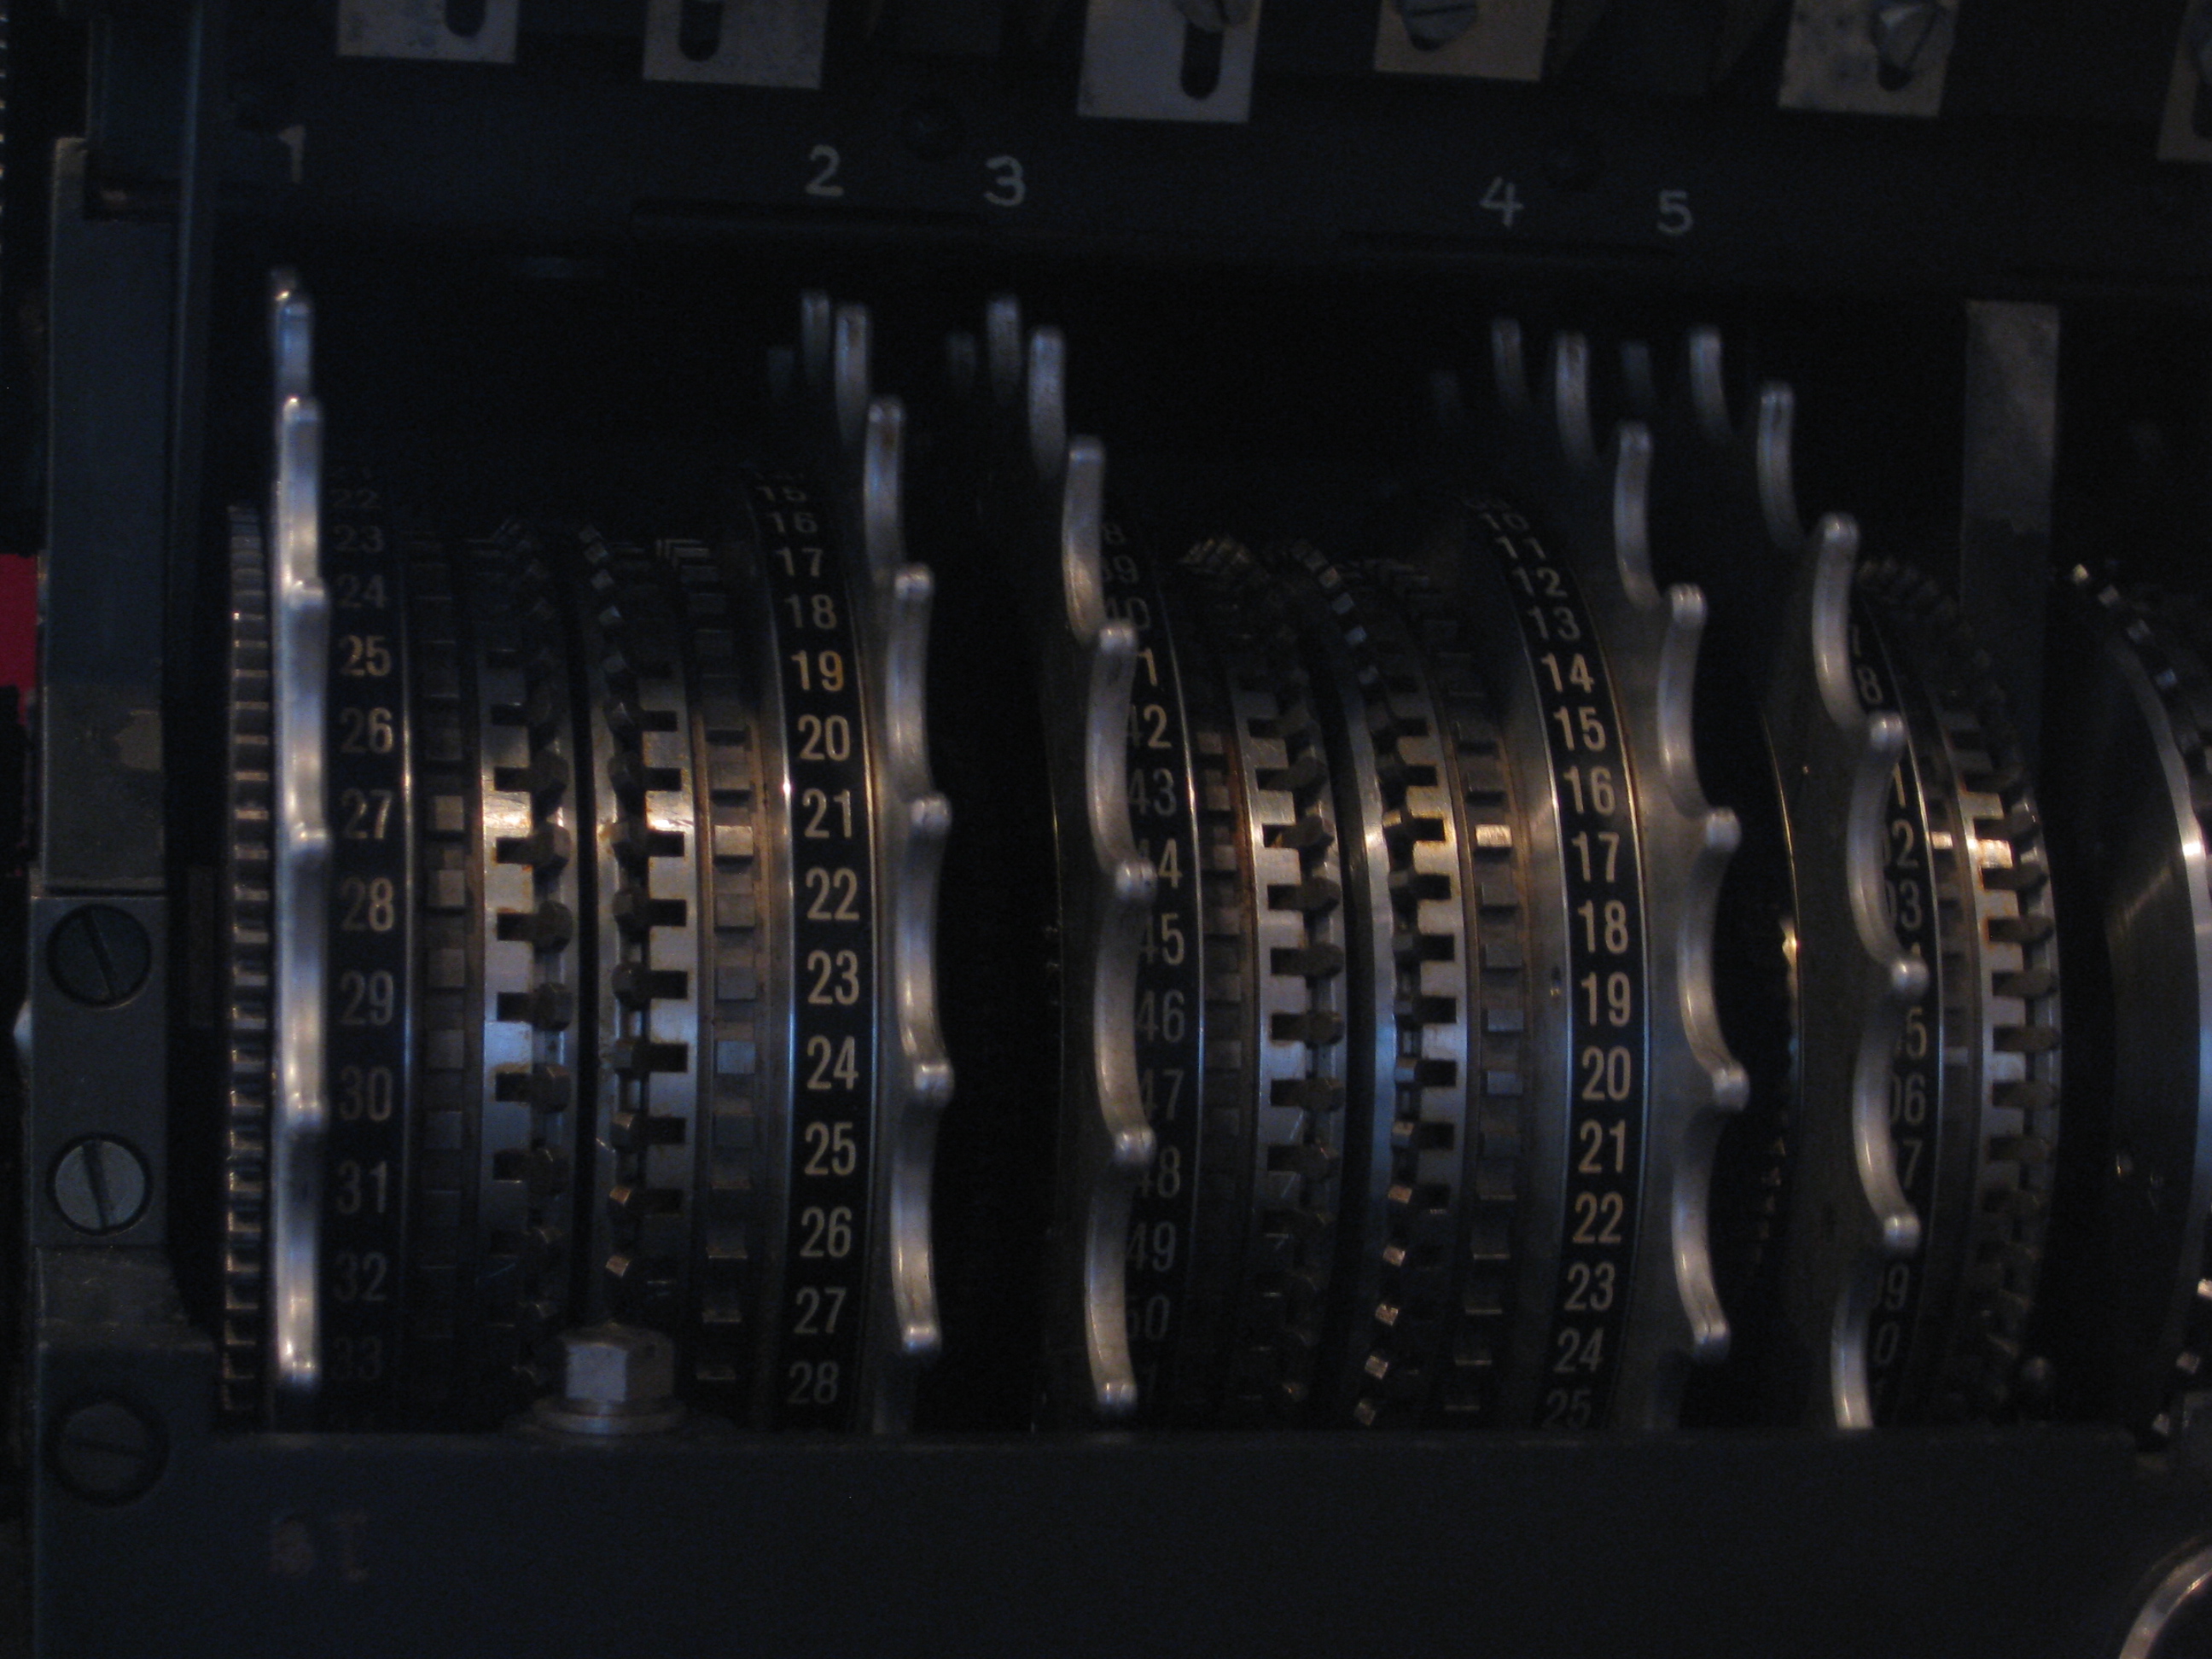 Rotors of TUNNY Cryptographic Machine